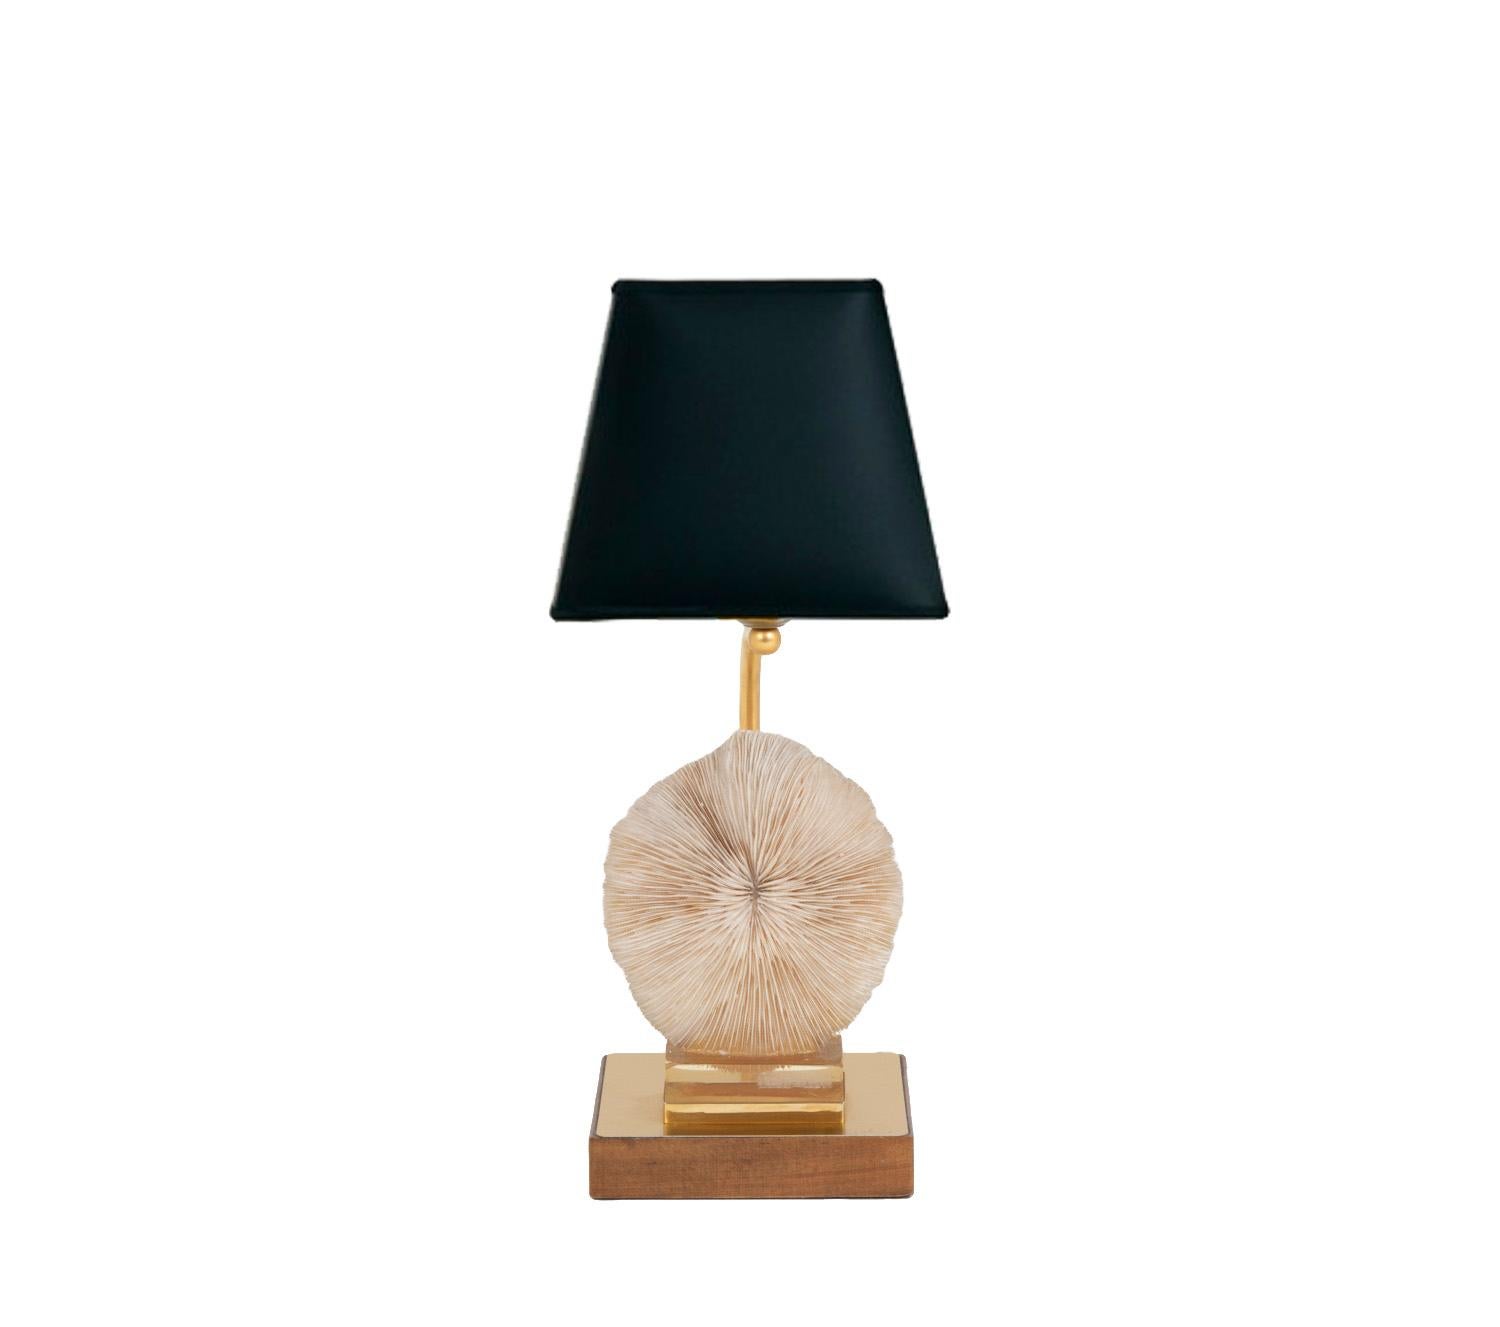 Lamp decorated with a Fungia Fungites coral fixed on resin. The whole stands on a gilt brass plate fixed on a square shape wood base.

Work realized in the 1970s.

New and functional electrical system.

!The price doesn’t include the lampshade